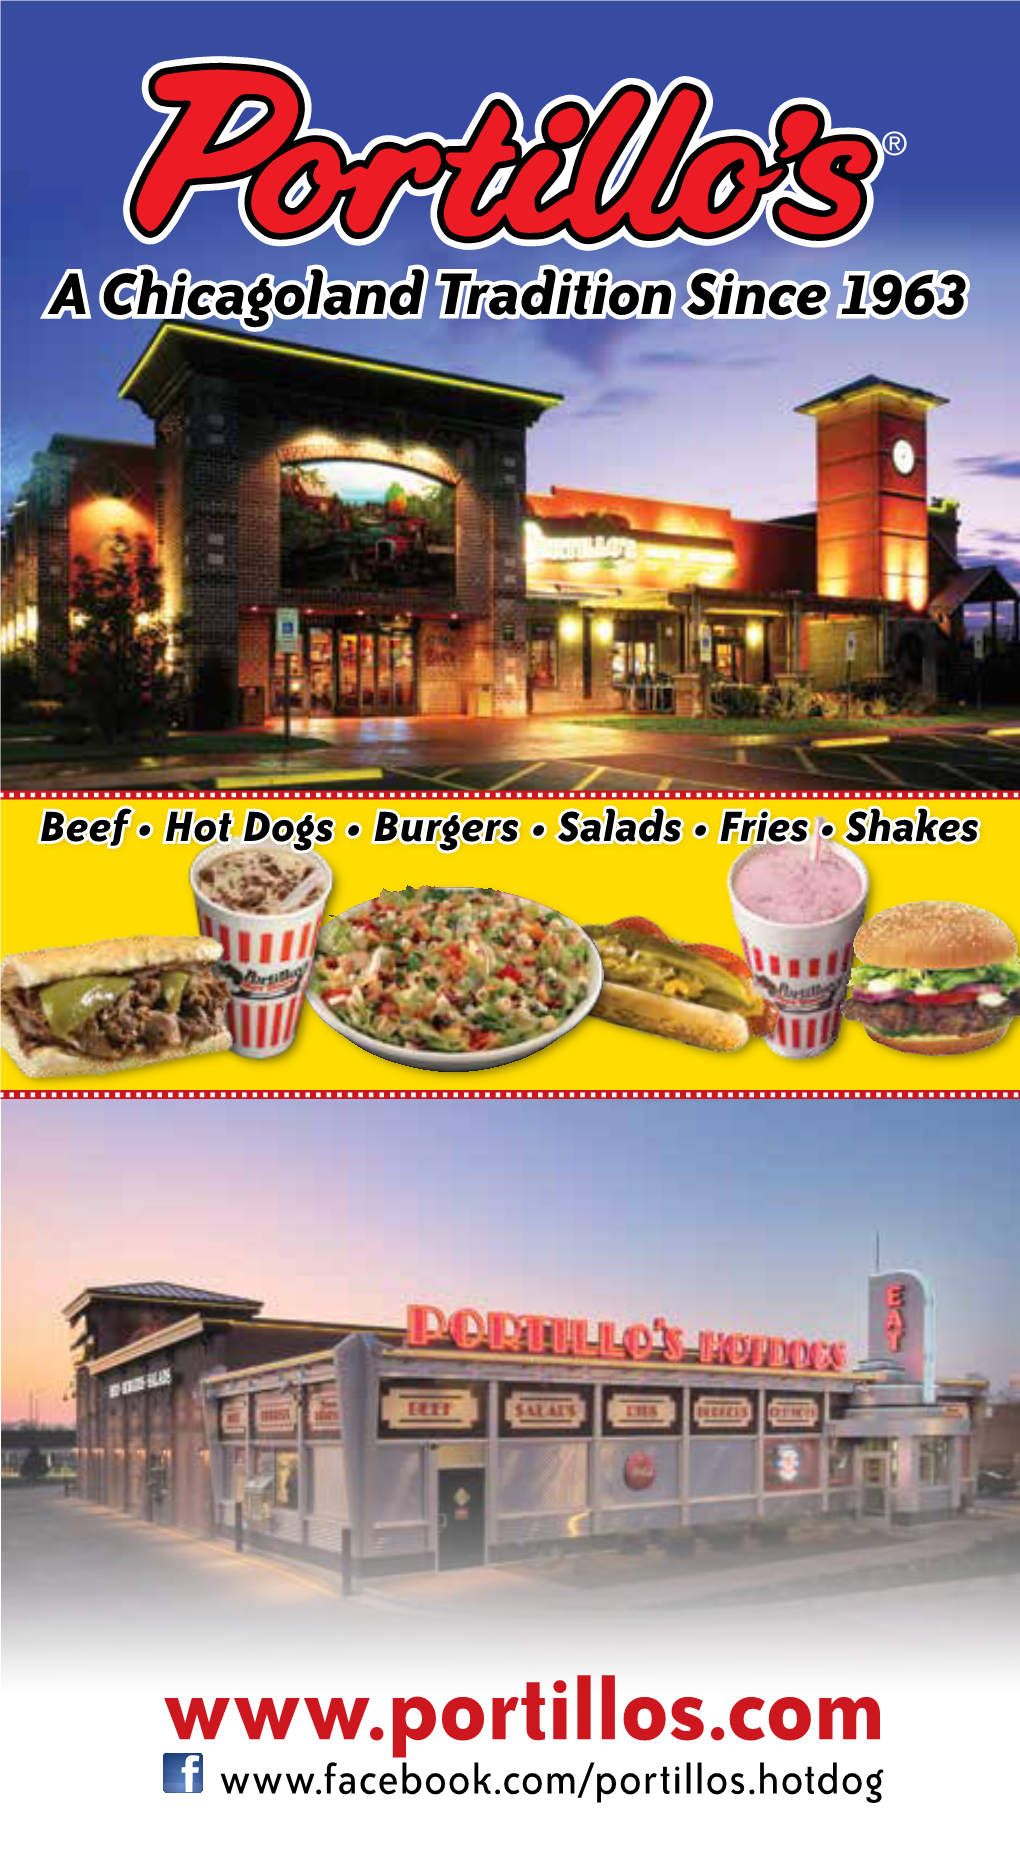 Beef • Hot Dogs • Burgers • Salads • Fries • Shakes SMOOTHIES (300-500 Cal) ASK YOUR SERVER for TODAY’S FLAVOR!